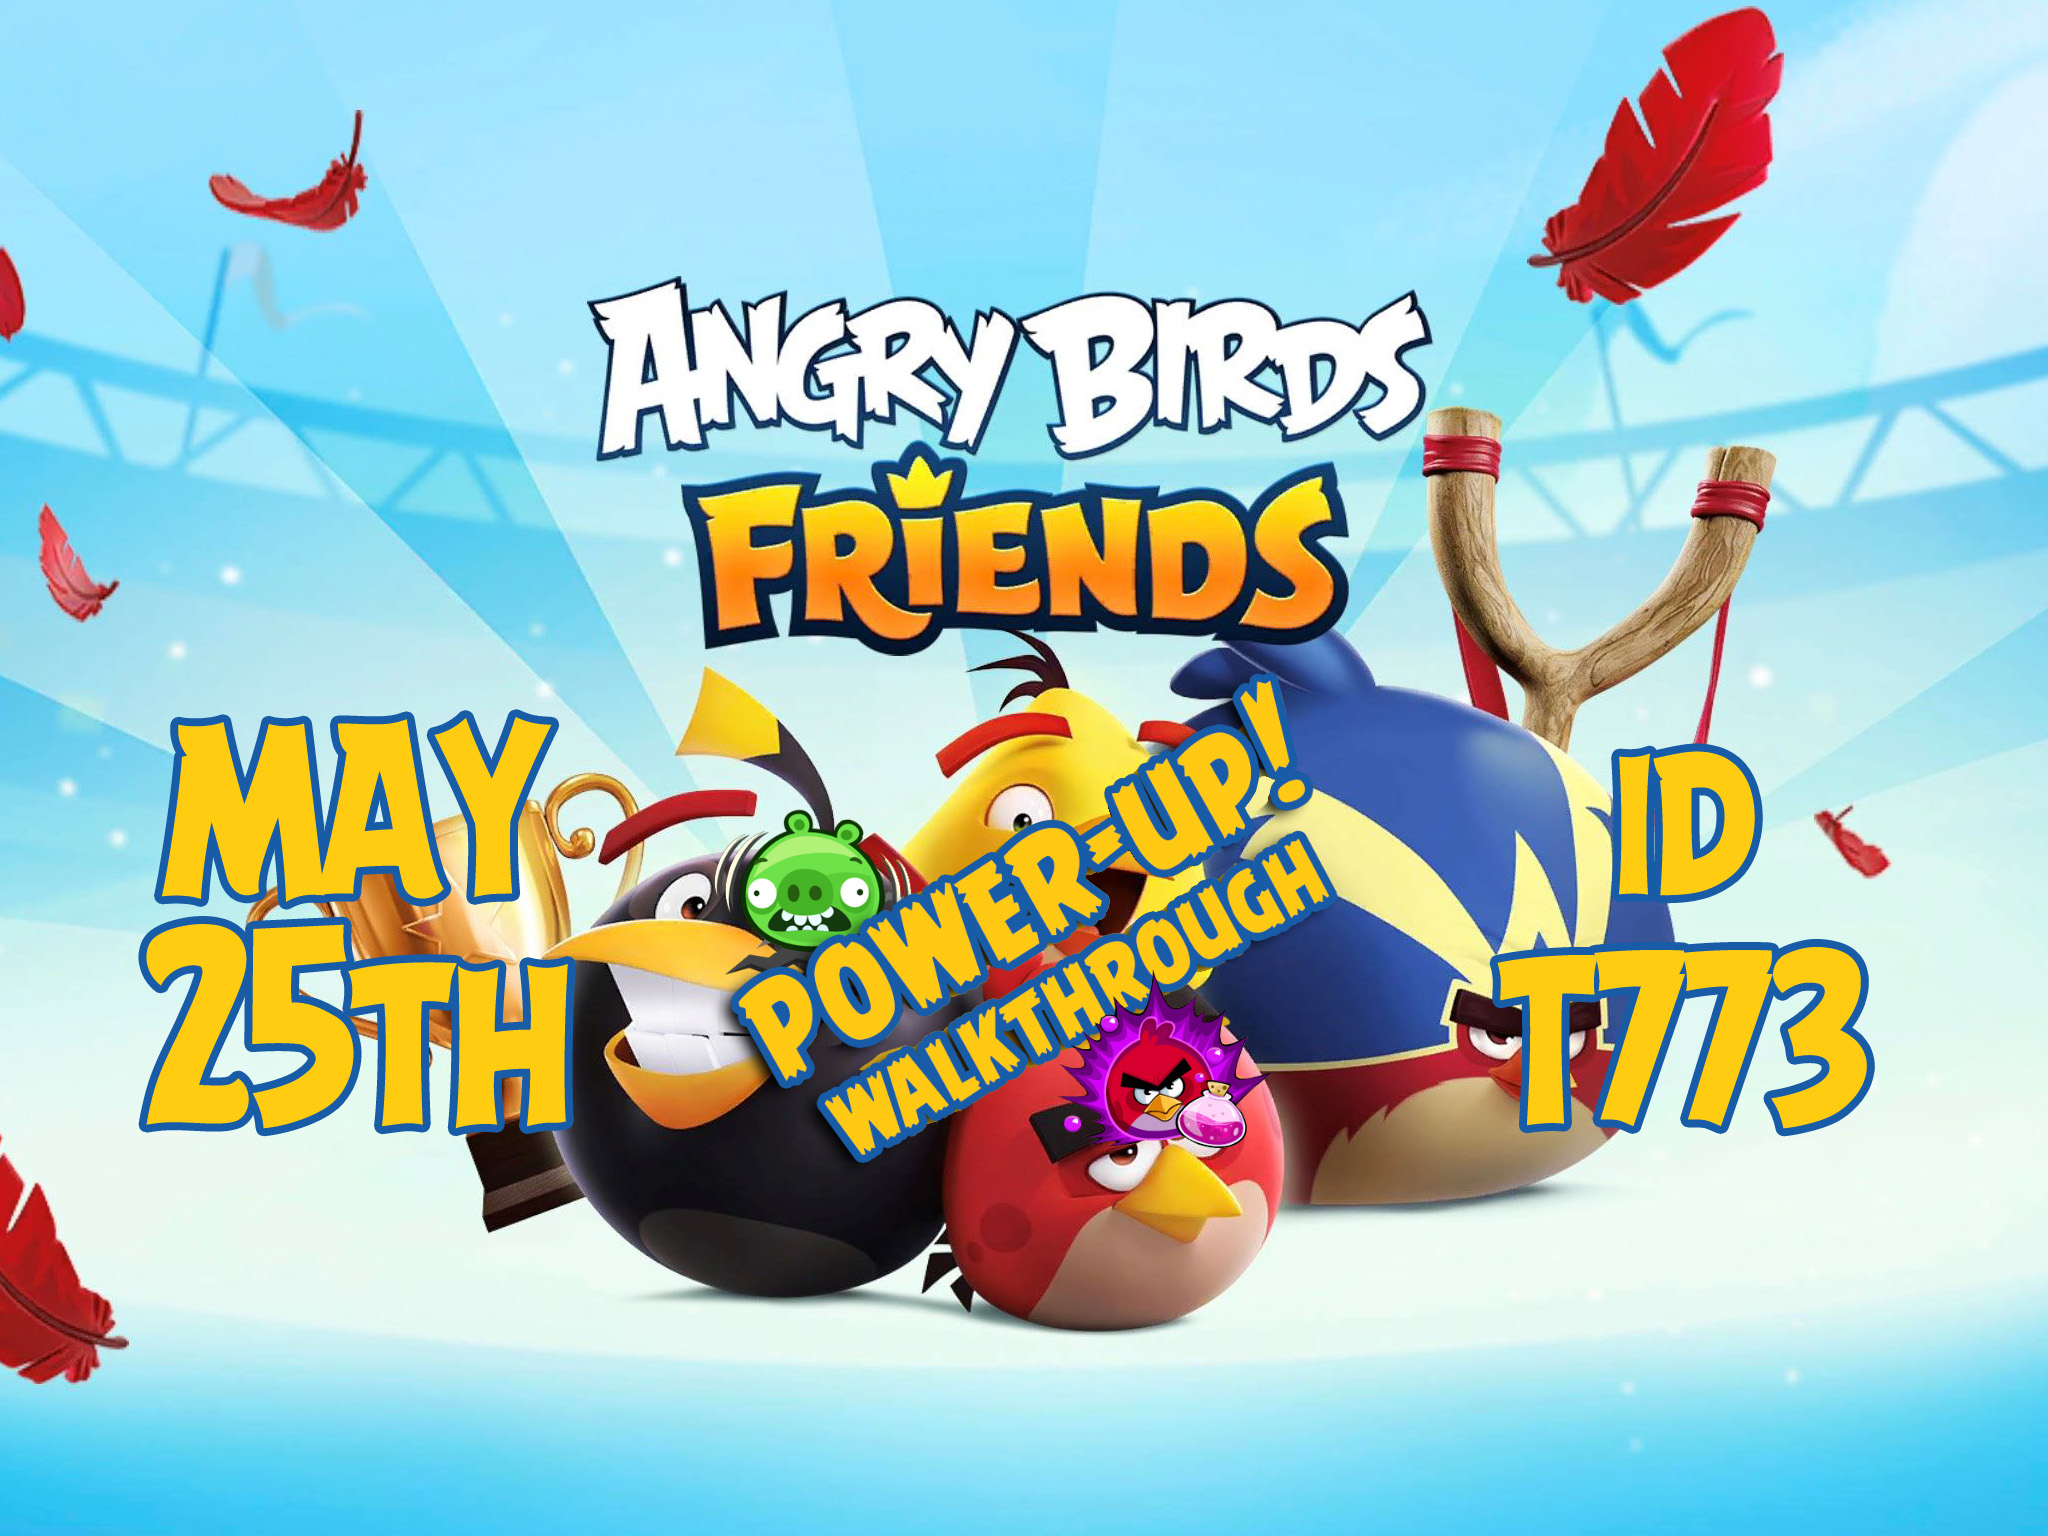 Angry-Birds-Friends-Tournament-T773-Feature-Image-PU